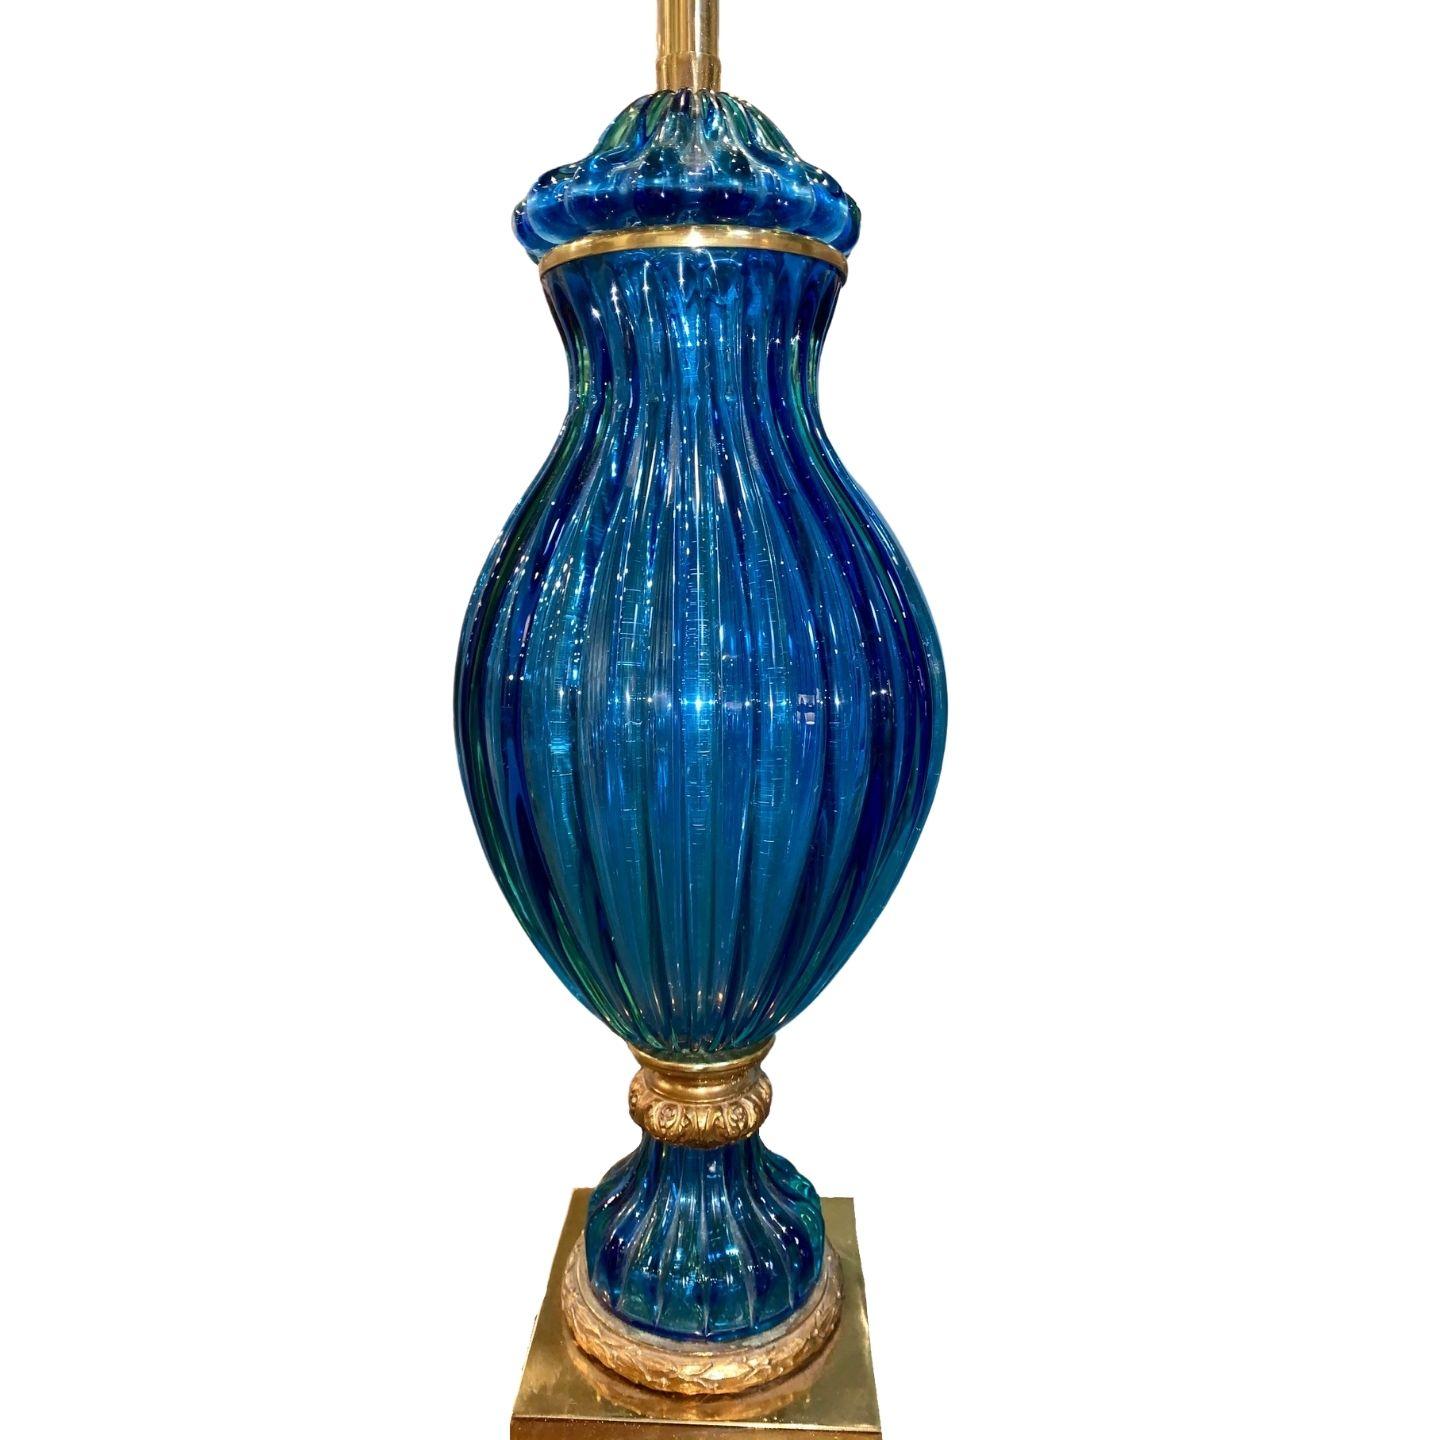 Beautiful blue Murano lamp with a gold base.